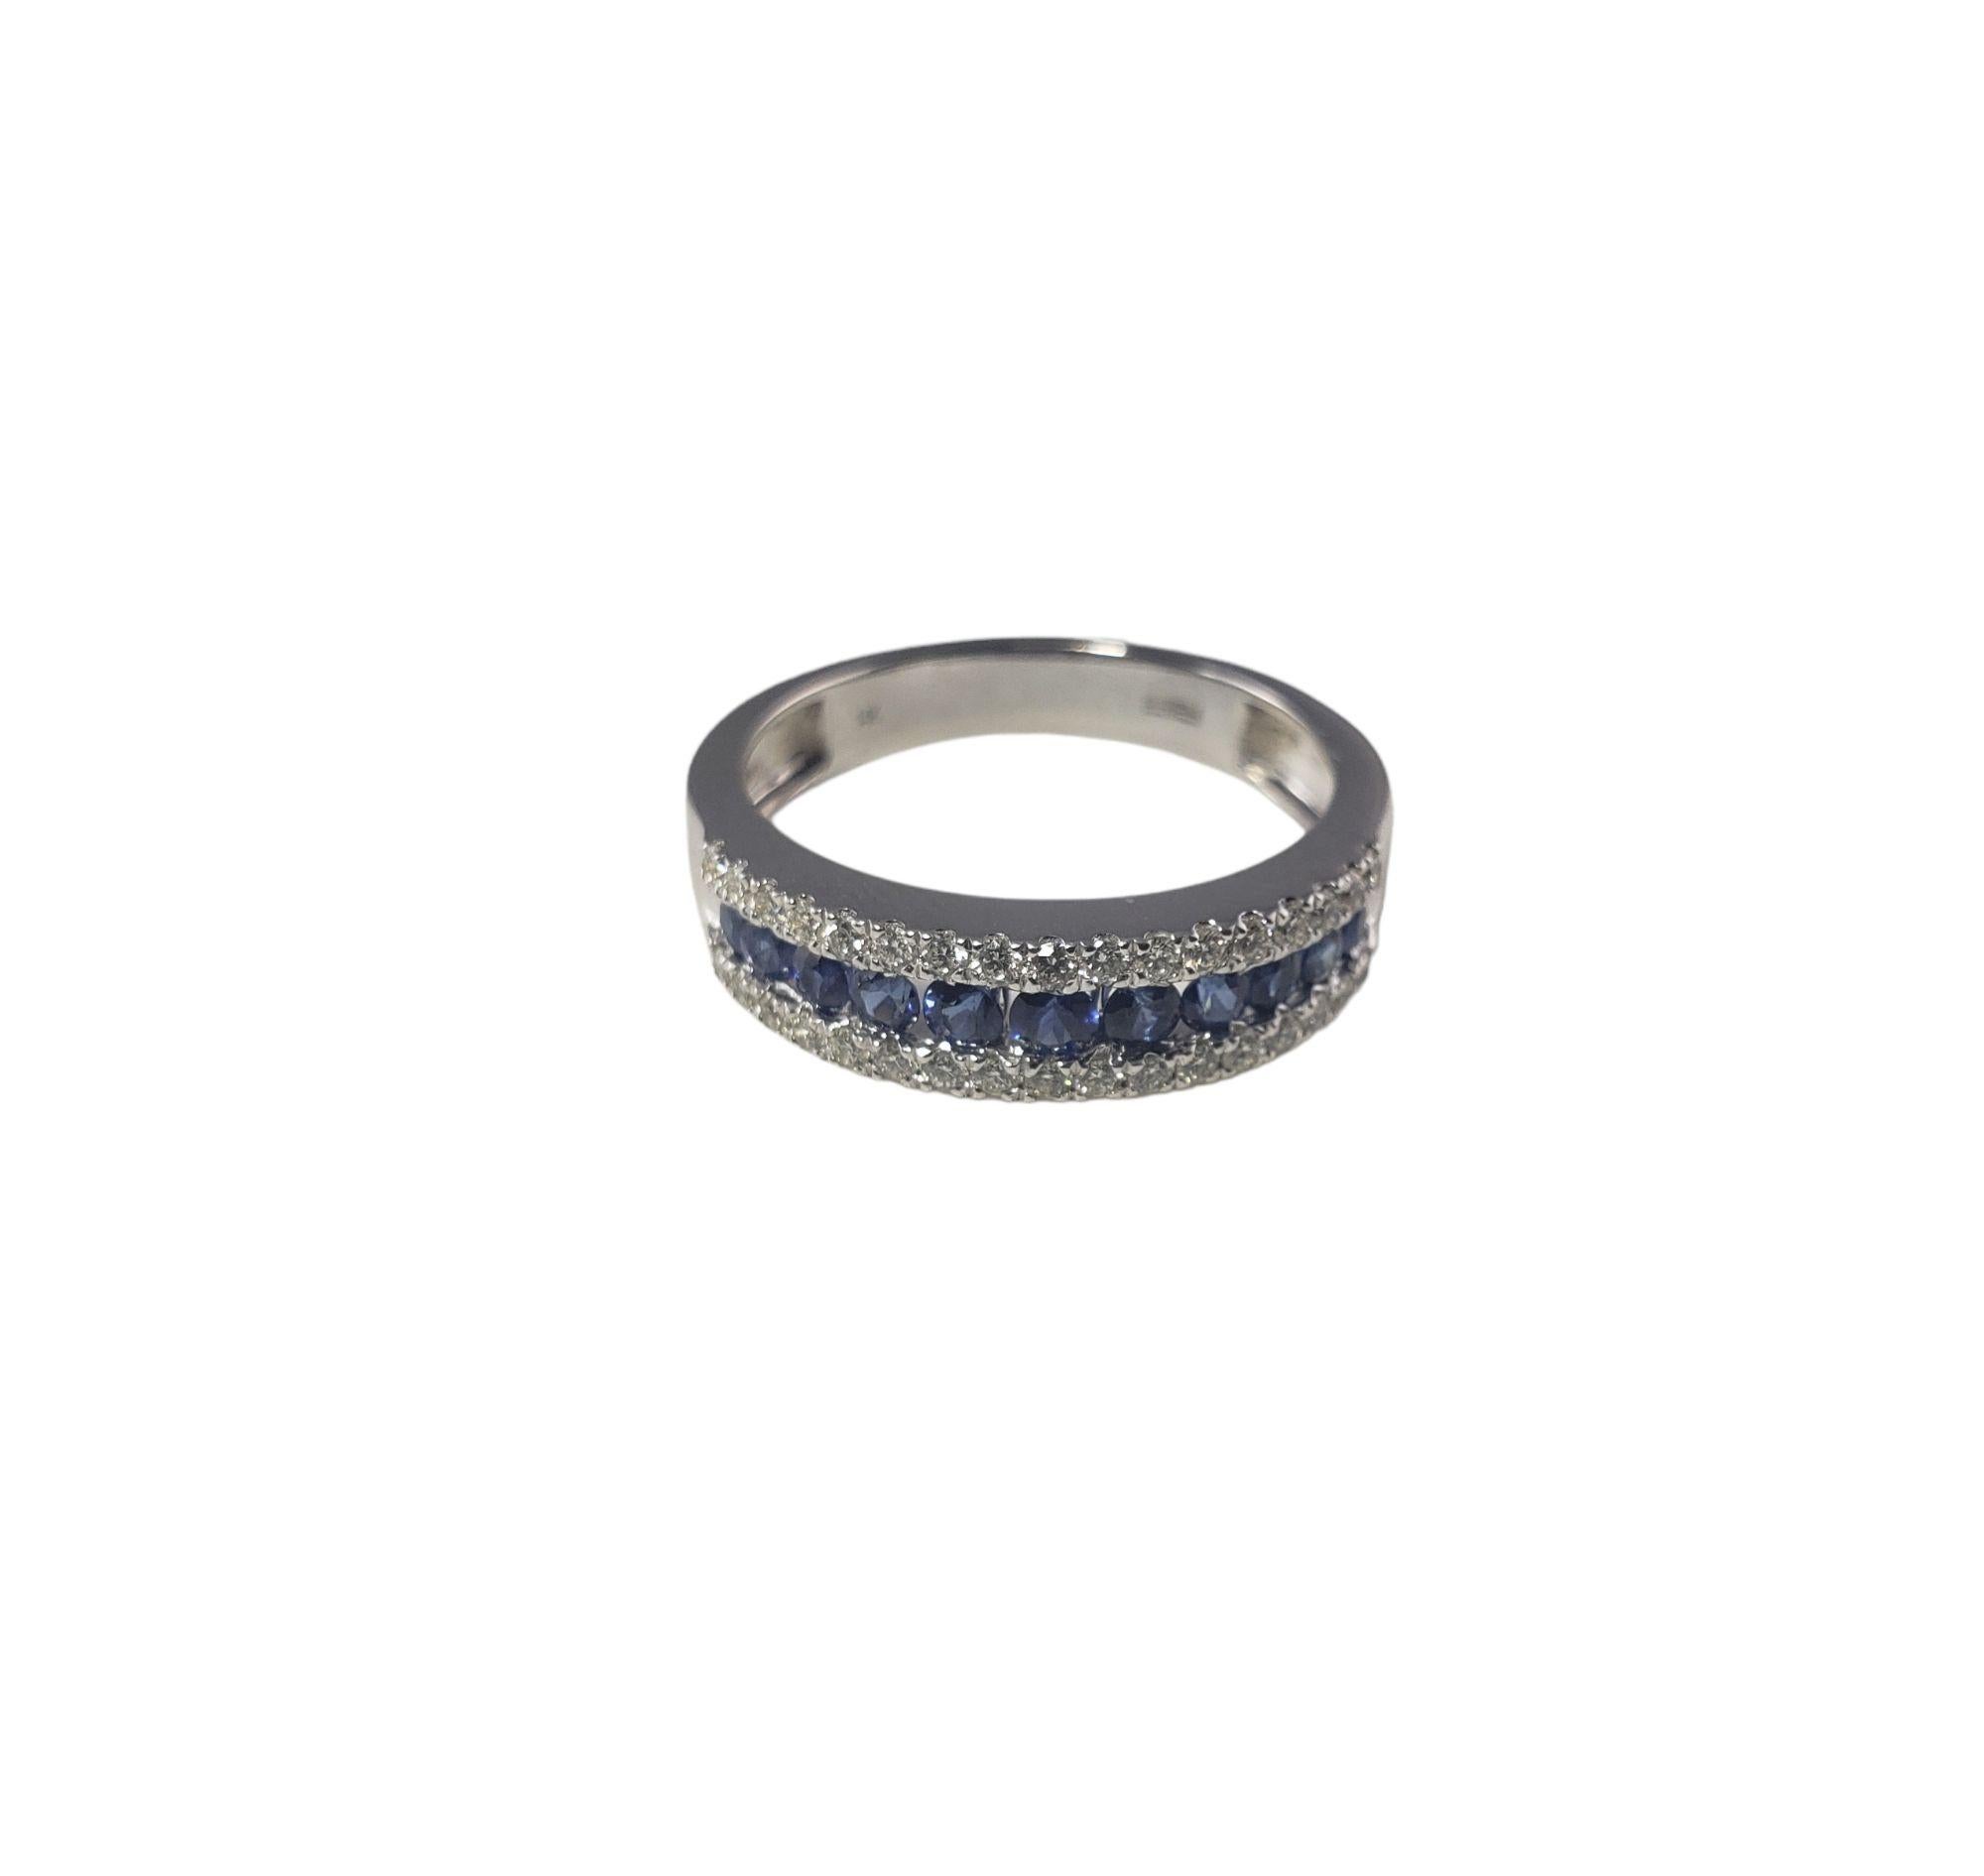 This sparkling ring features 11 round sapphires and 34 round brilliant cut diamonds set in 14K white gold.

Width:  5 mm.  Shank: 3 mm.

Approximate total diamond weight: .40 ct.

Diamond color: G

Diamond clarity: VS1

Ring Size: 8

Weight: 2.8